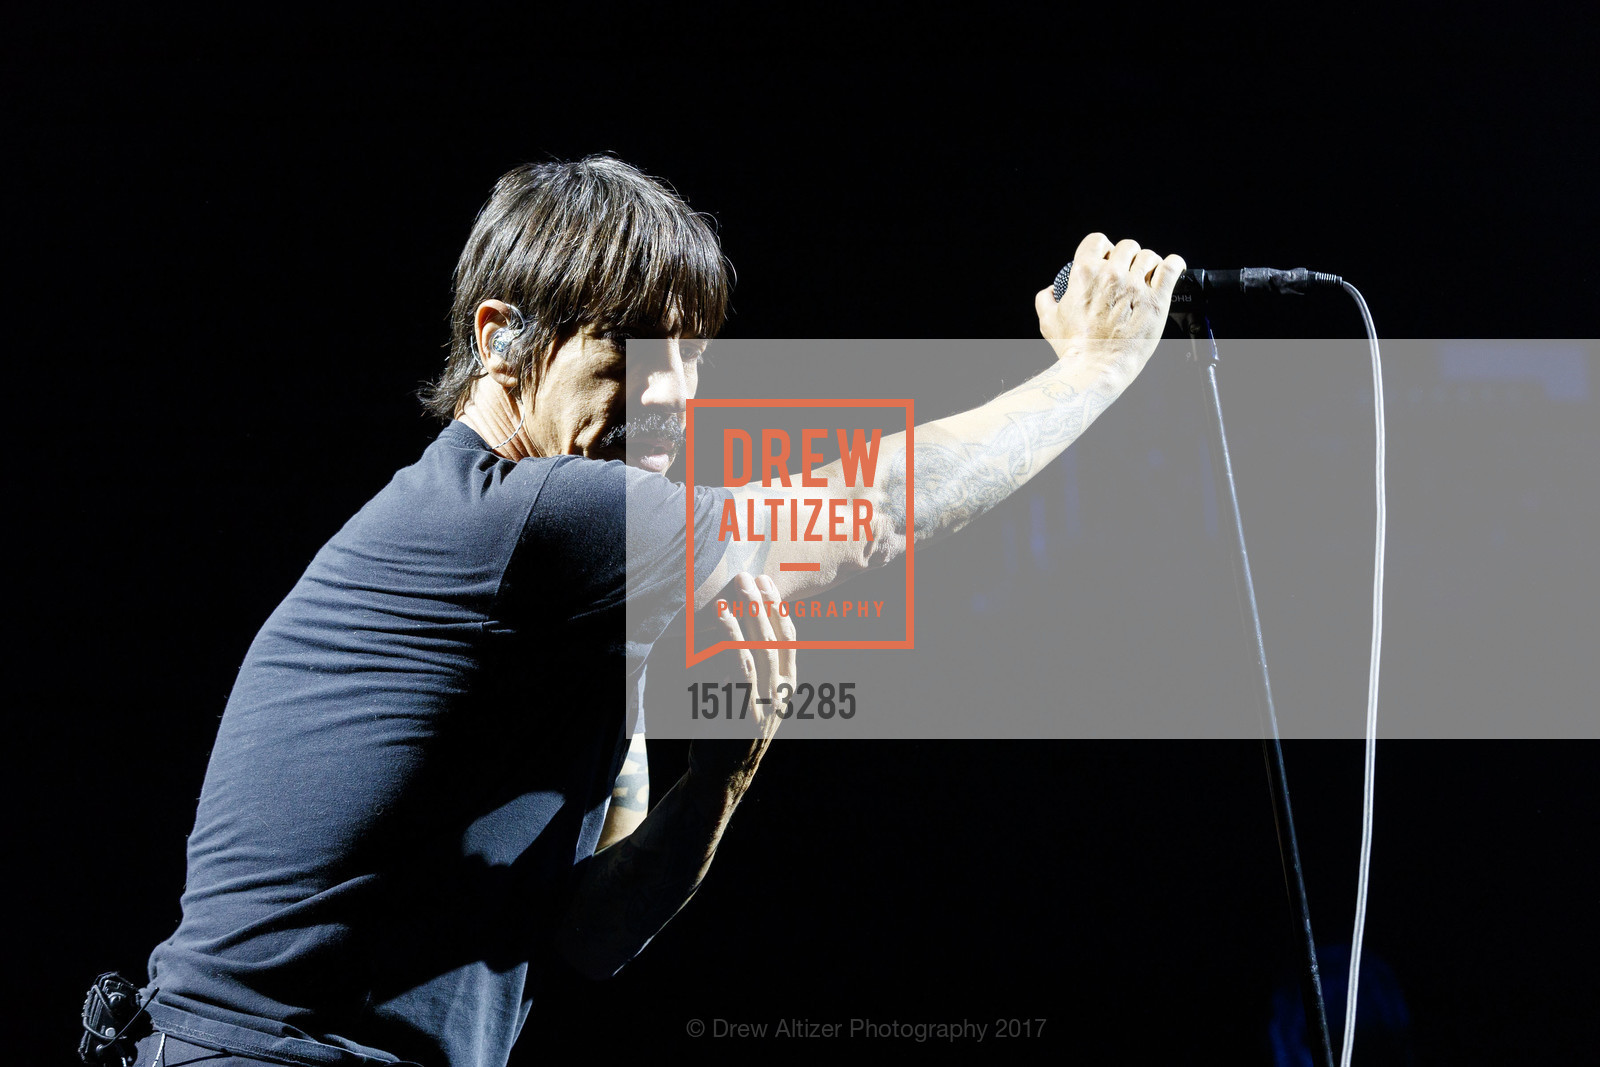 The Red Hot Chili Peppers, Photo #1517-3285